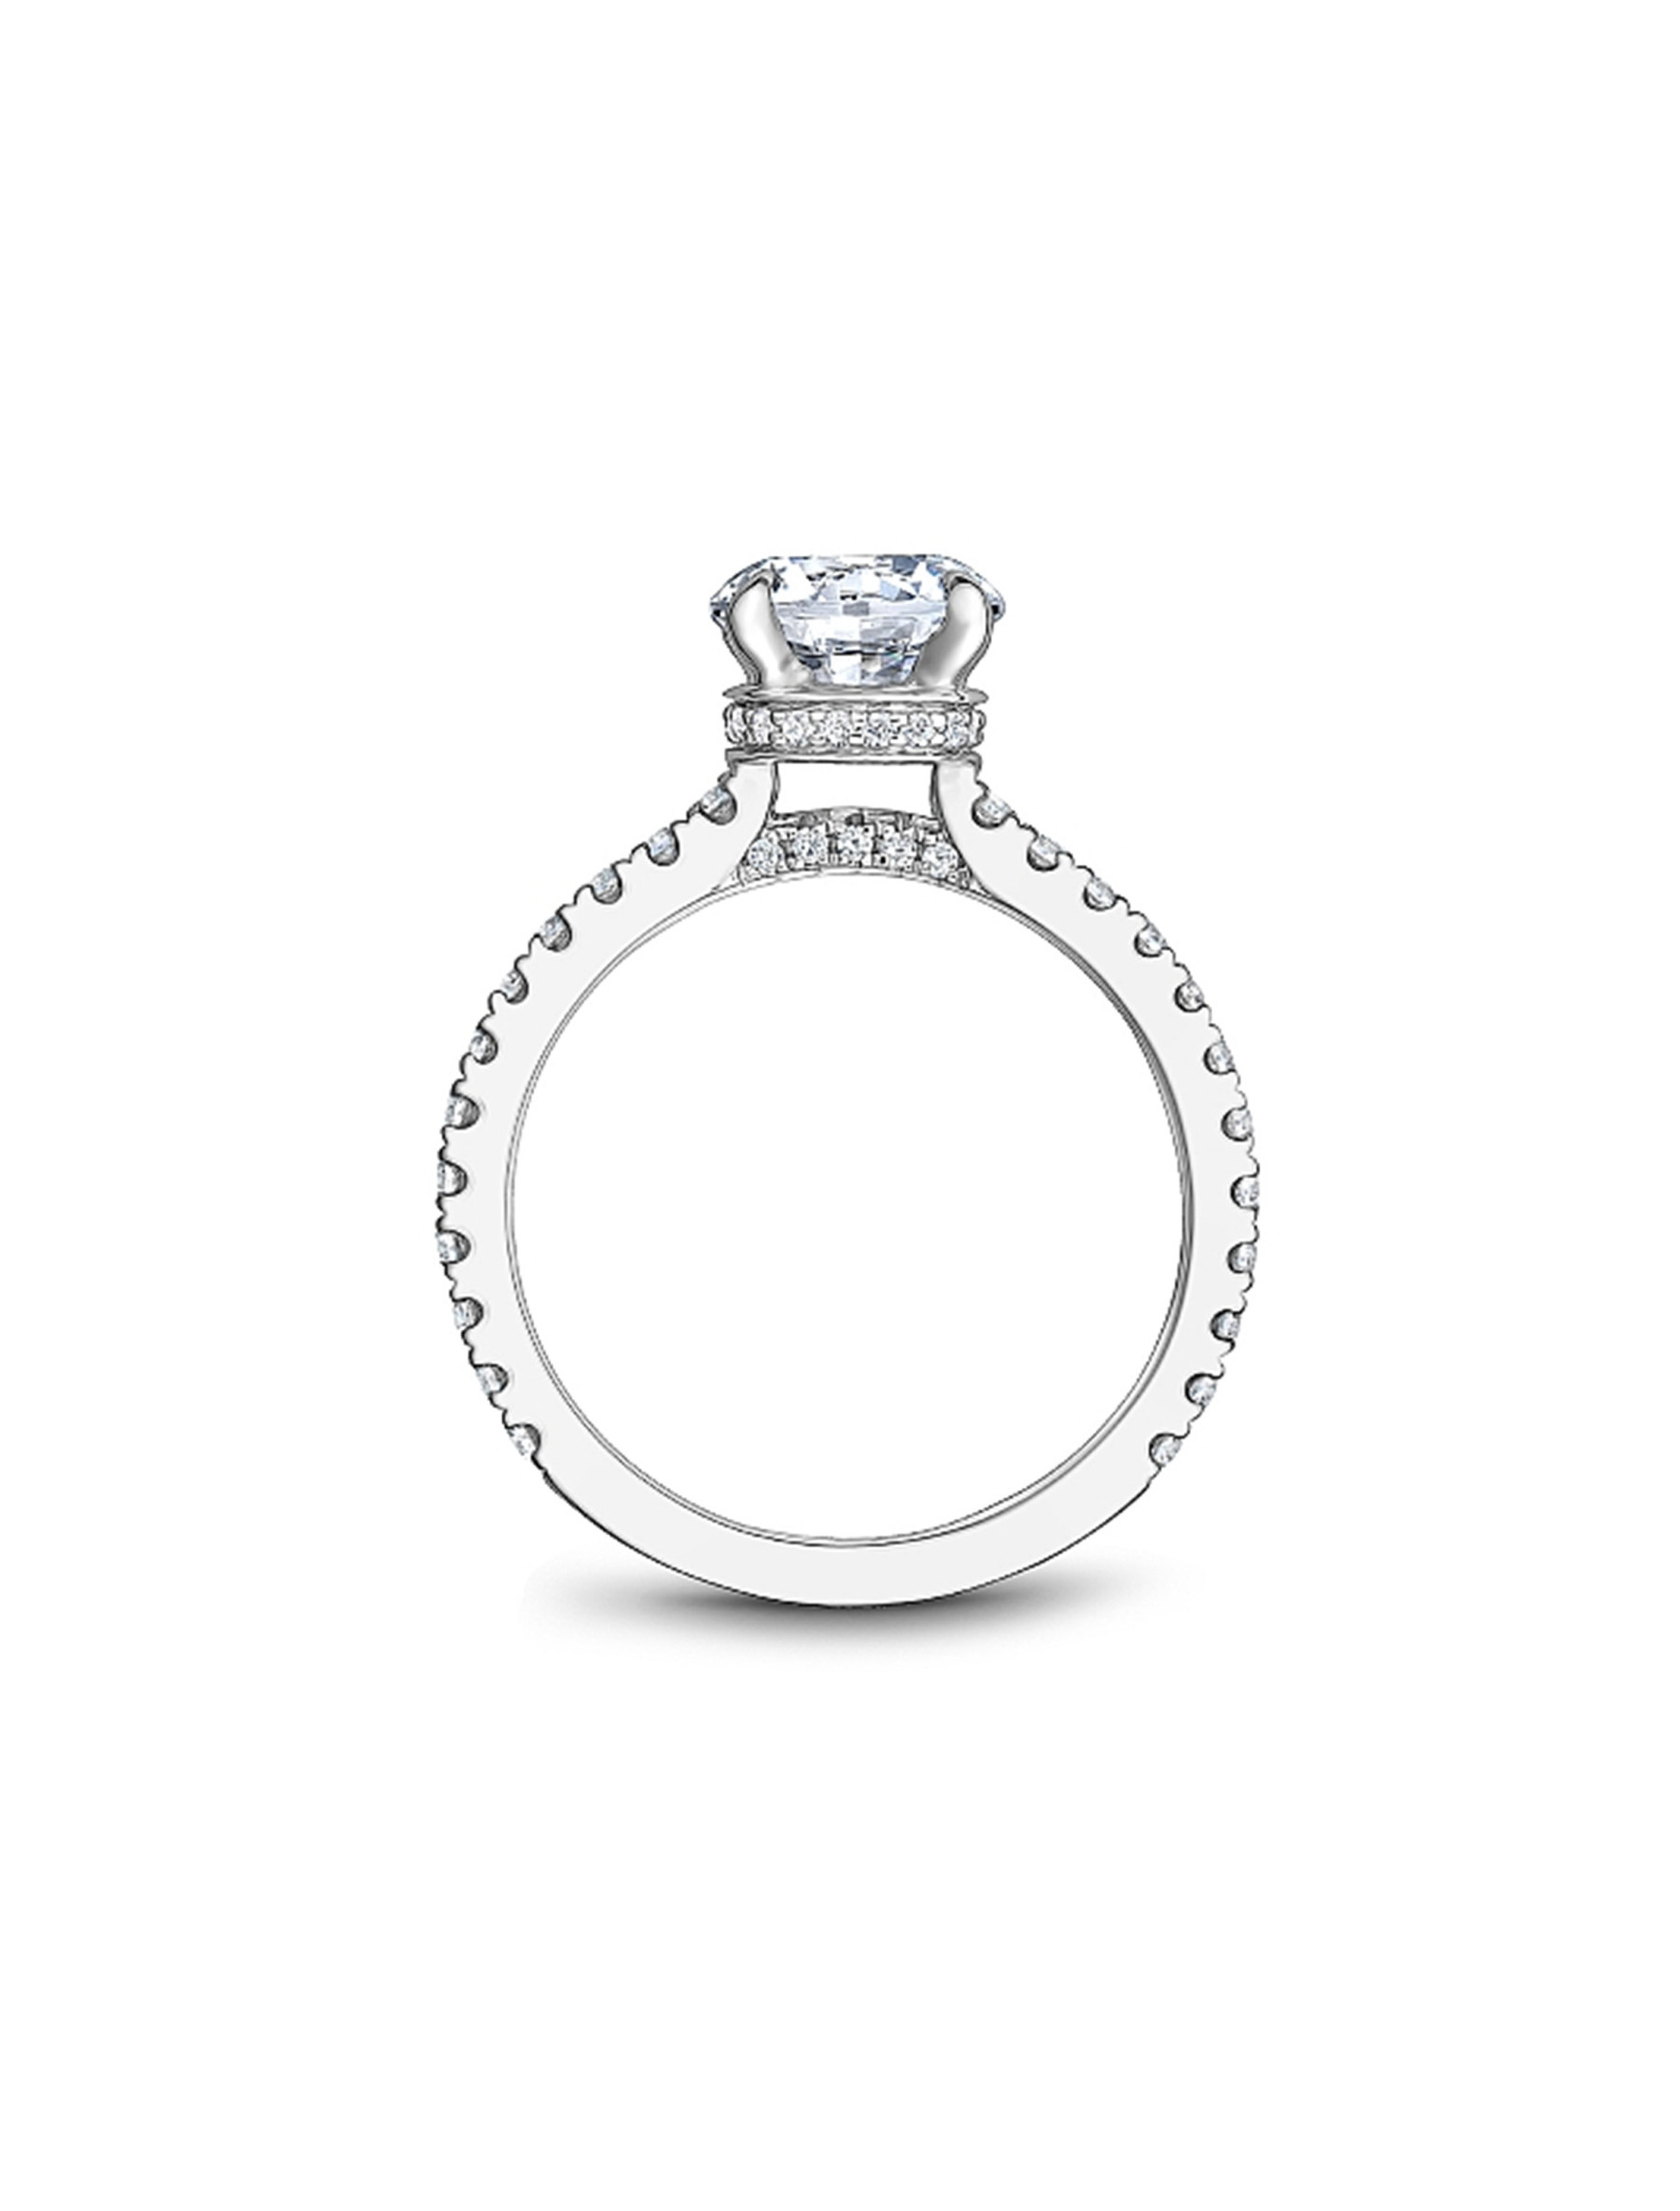 Noam Carver Round Pave Diamond Crown Engagement Ring Setting in 18K White Gold side view